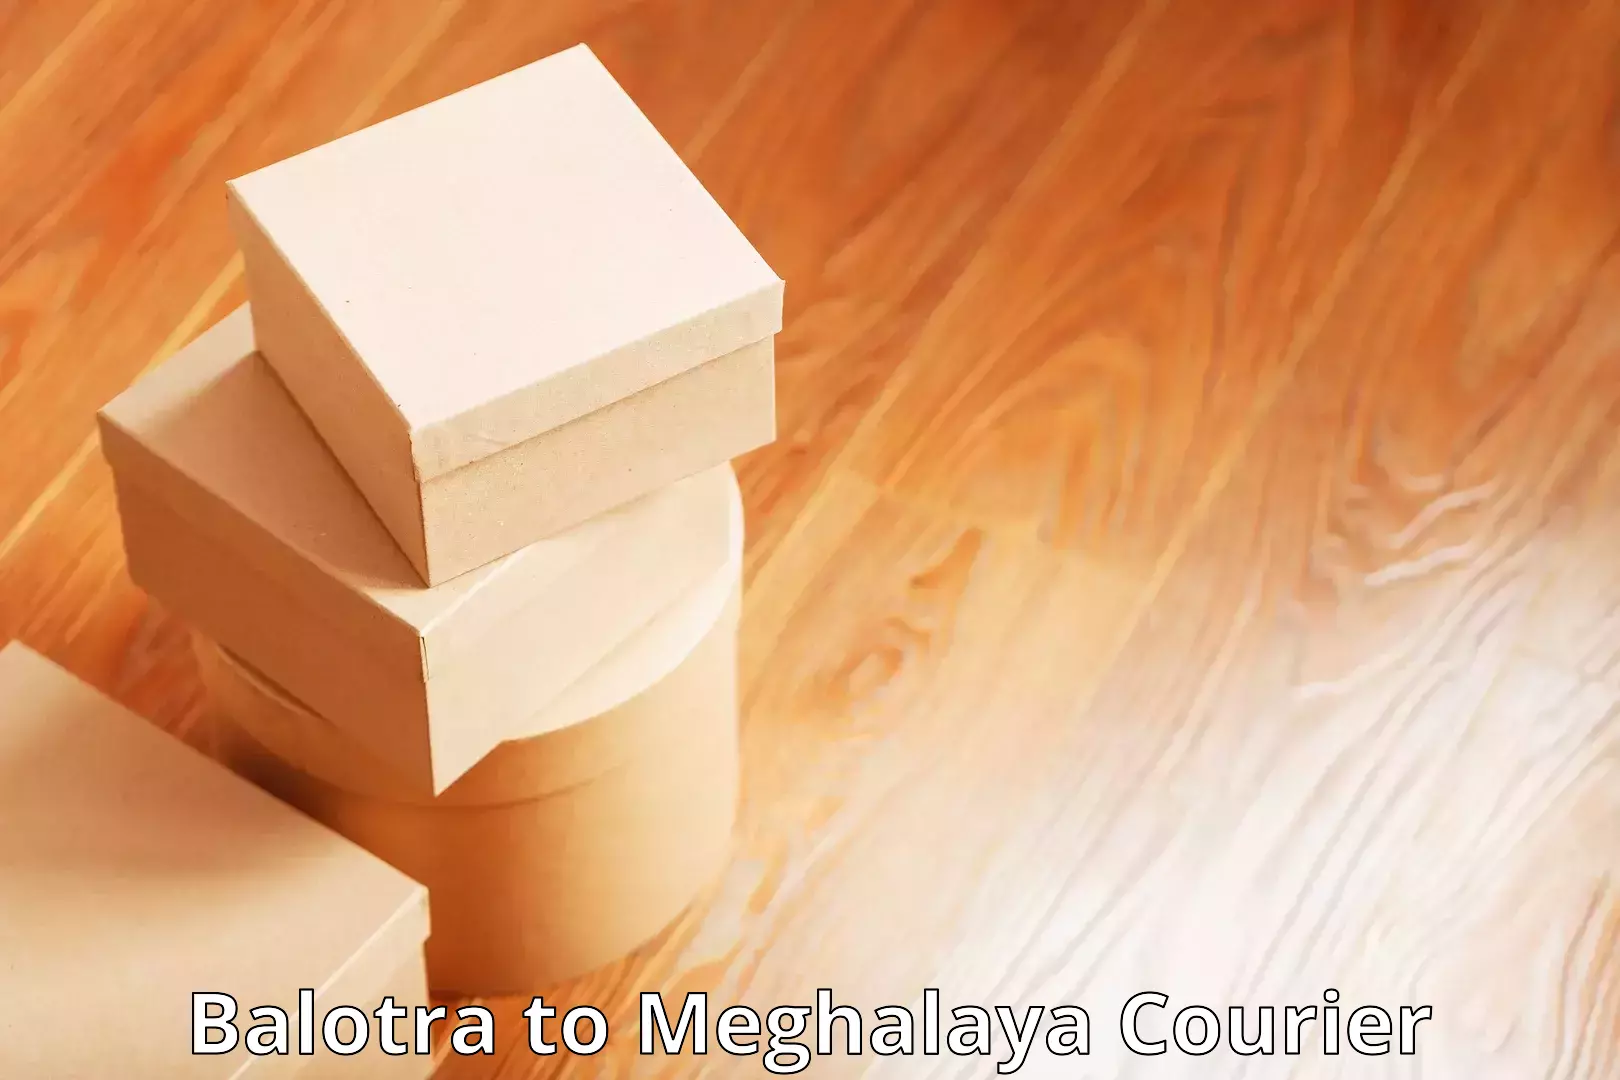 Courier service innovation in Balotra to Shillong